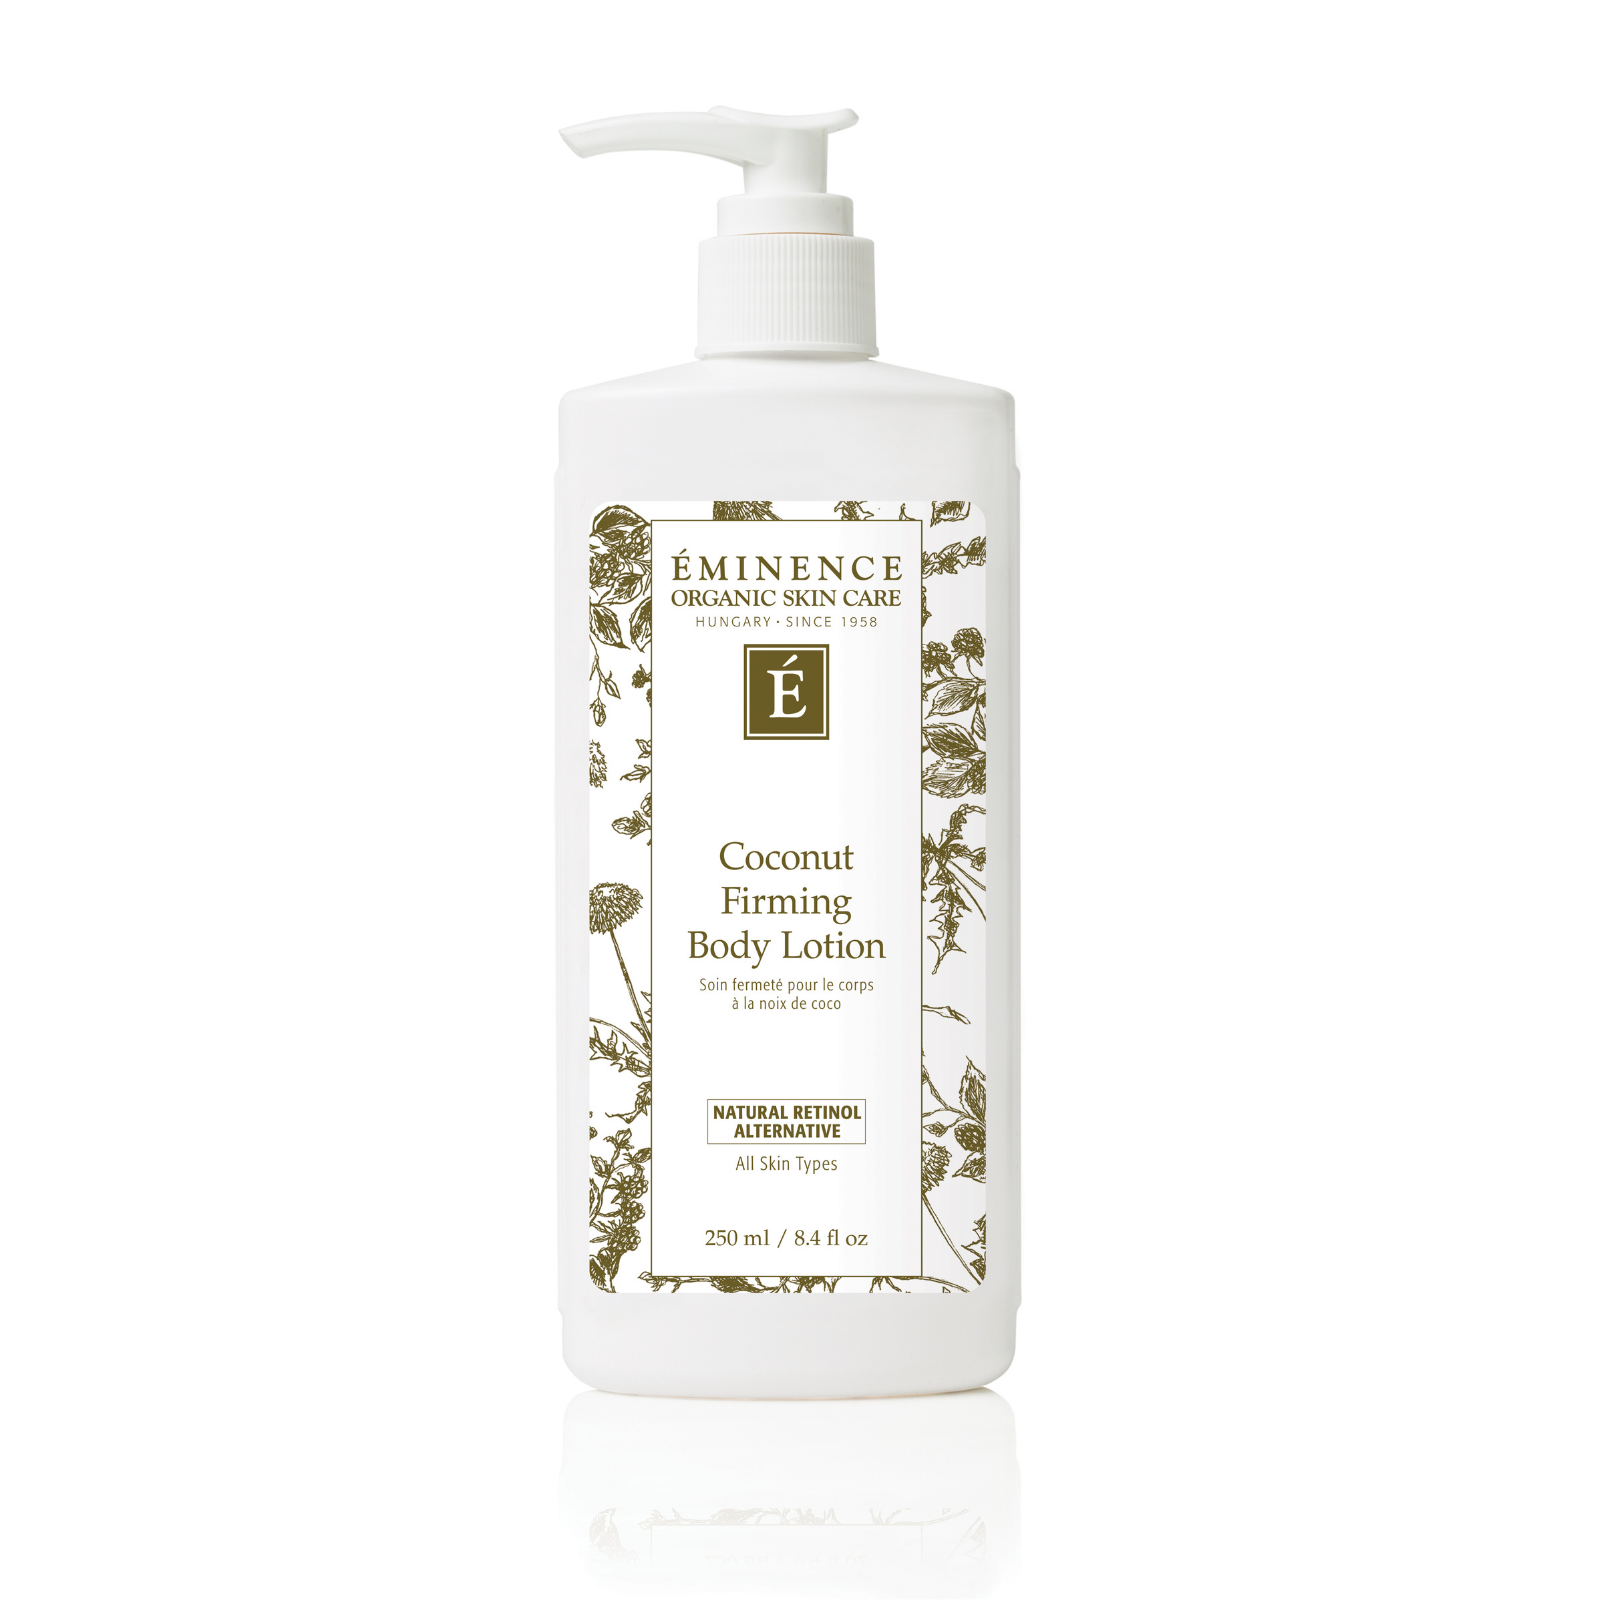 Eminence Coconut Firming Body Lotion - 250ml